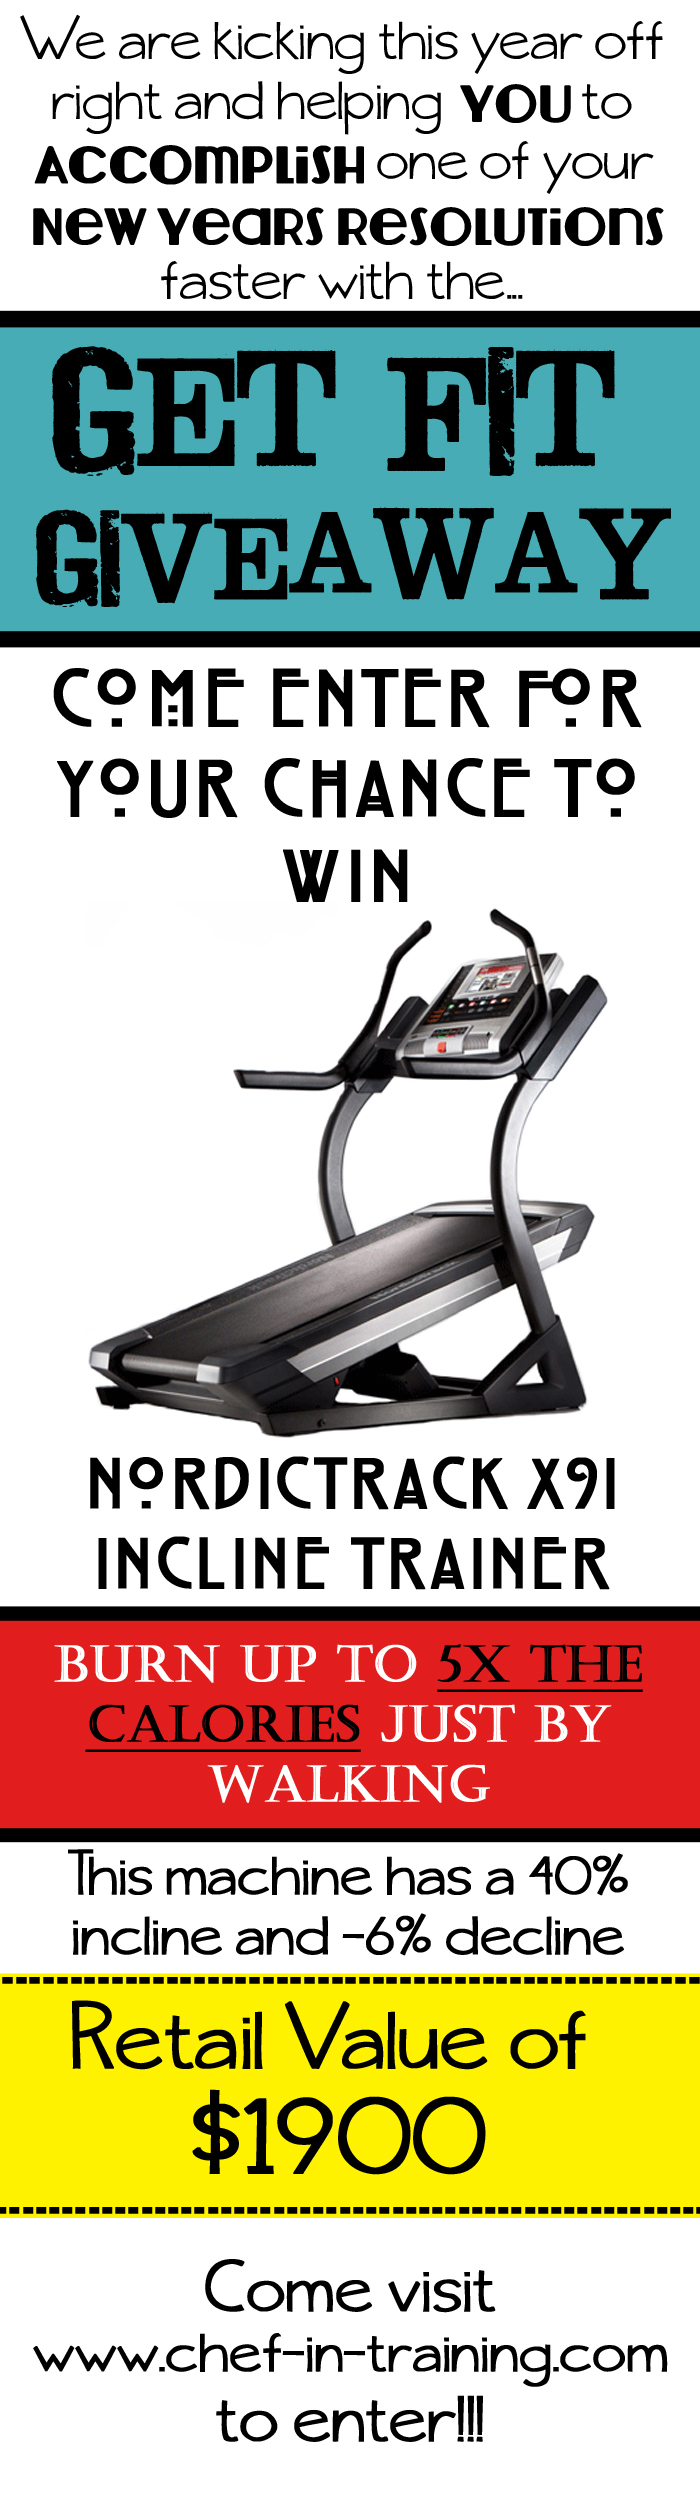 Get Fit Giveaway! Come enter for your chance to win a NordicTrack X9i Incline Trainer. $1900 Value!